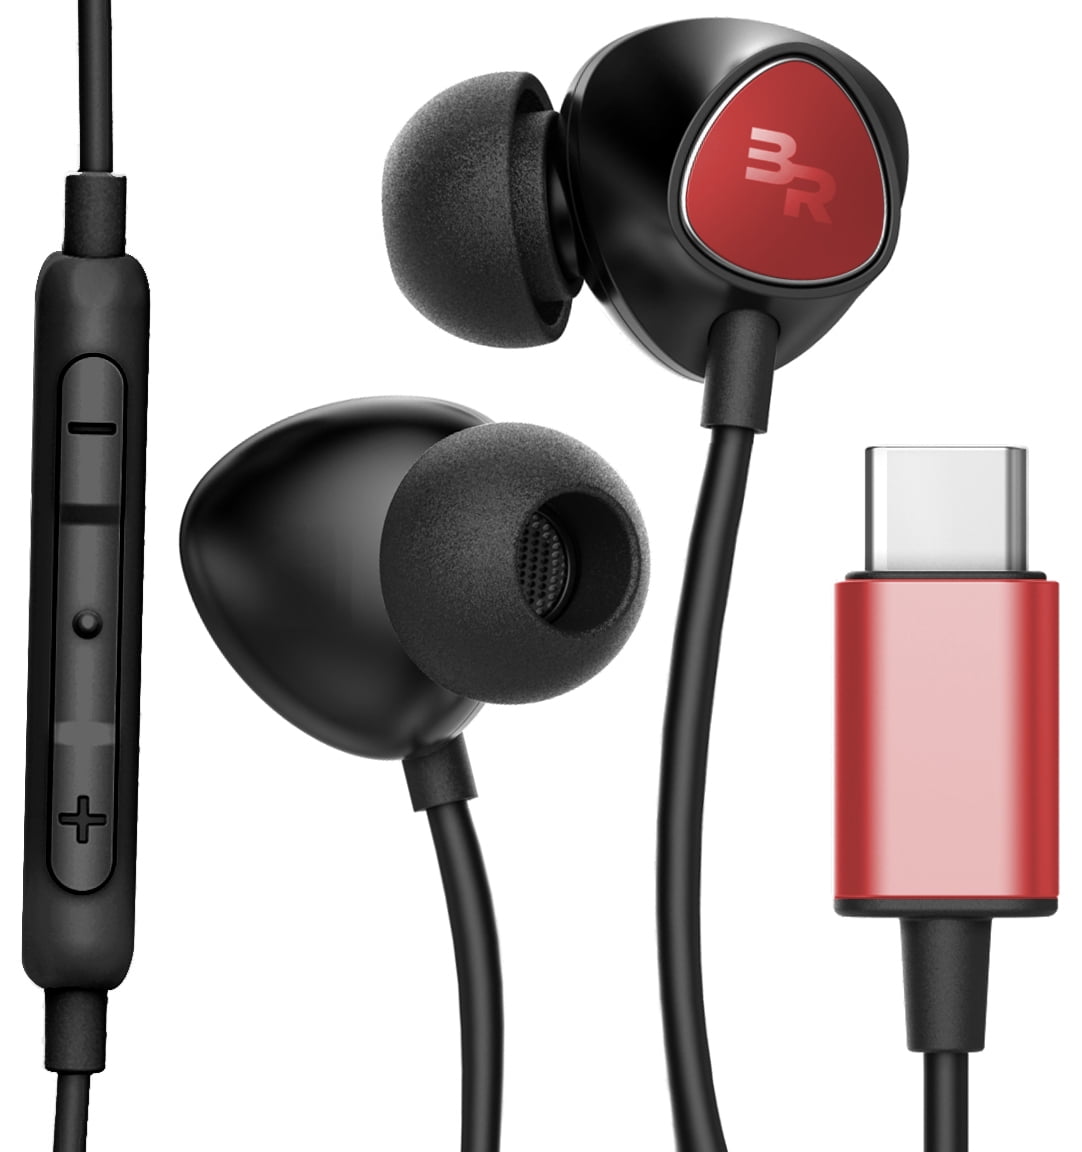 Thore USB Type C Earbuds (V100) In Ear Wired Headphones with Microphone